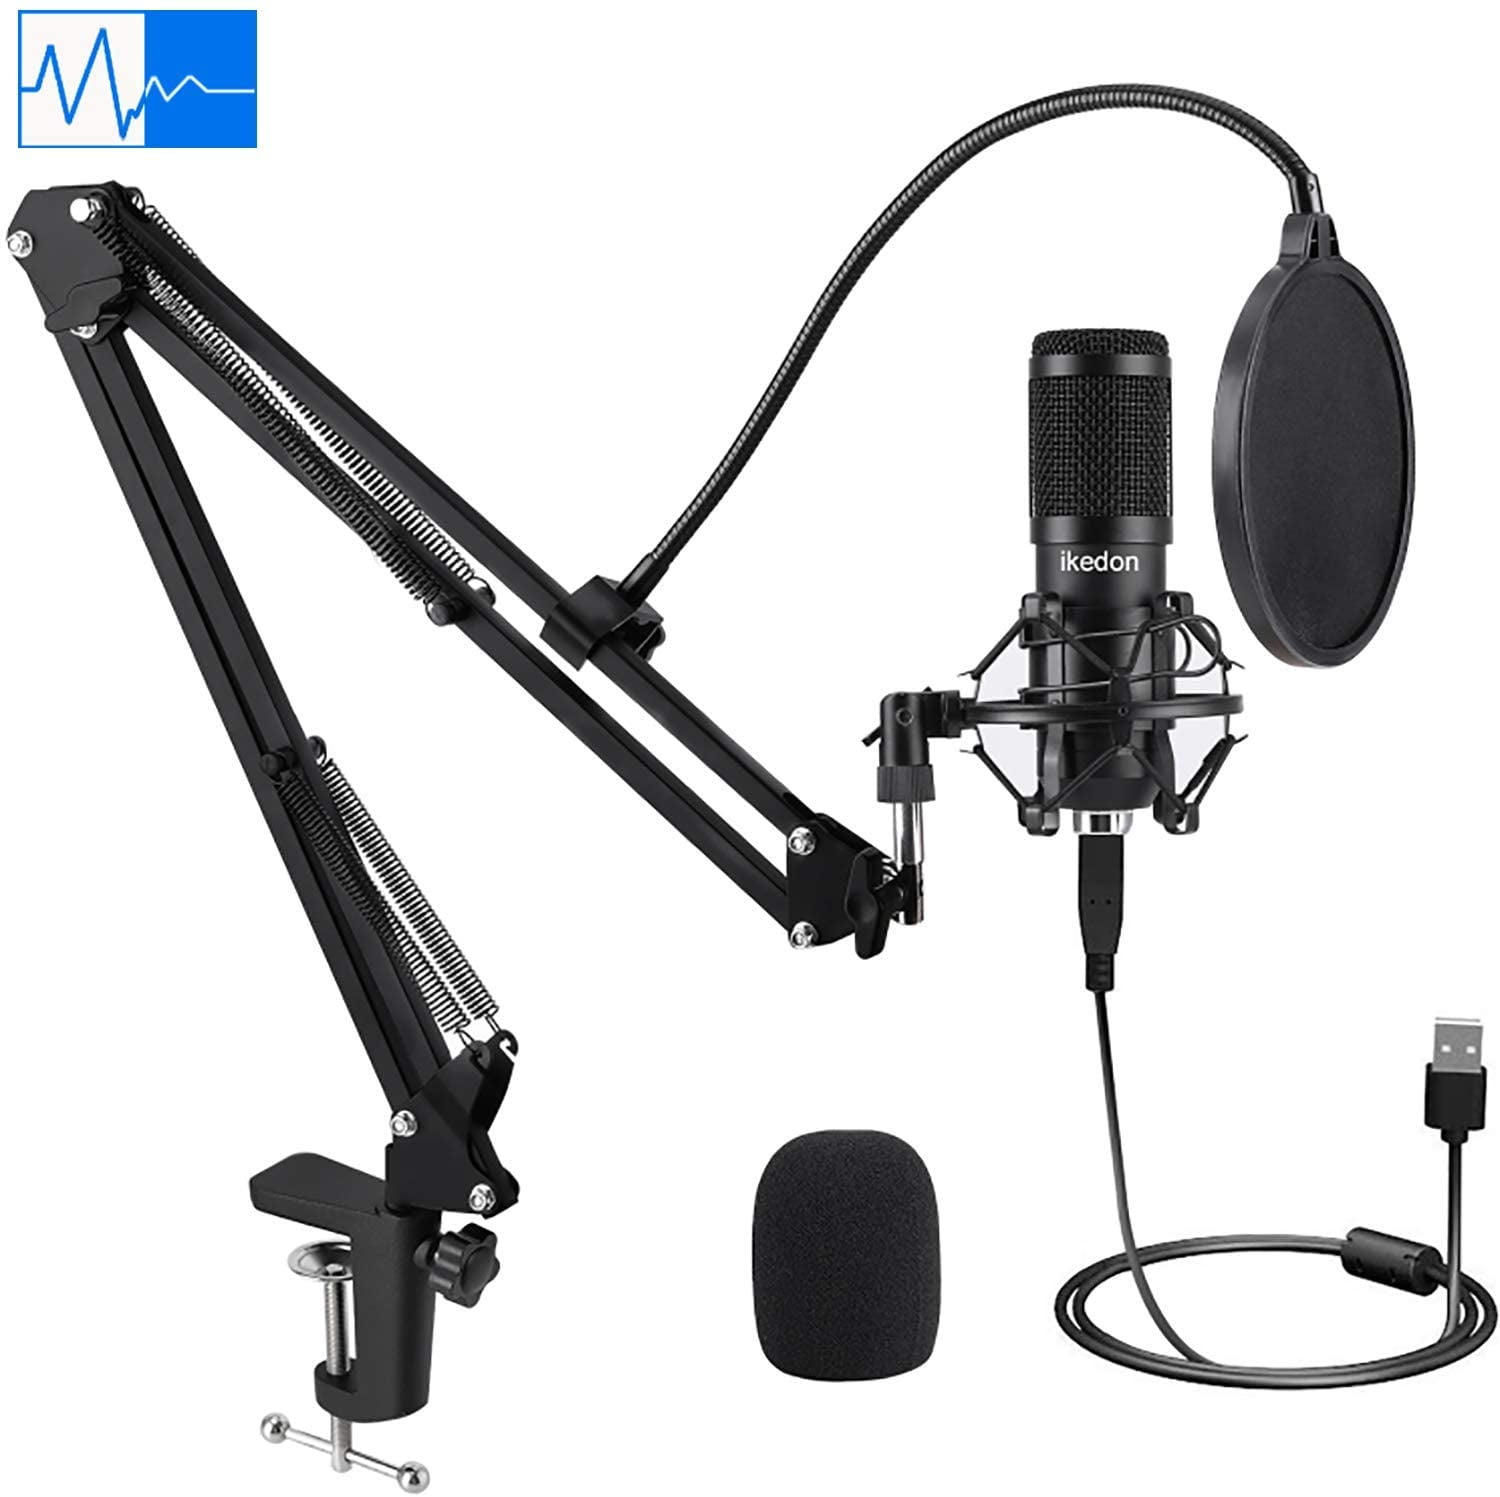 USB Microphone for Computer YouTube Videos,Voice Overs and Streaming Condenser Recording USB Microphone PC Microphone for Mac & Windows,Professional Plug&Play Studio Microphone for Gaming Podcast 